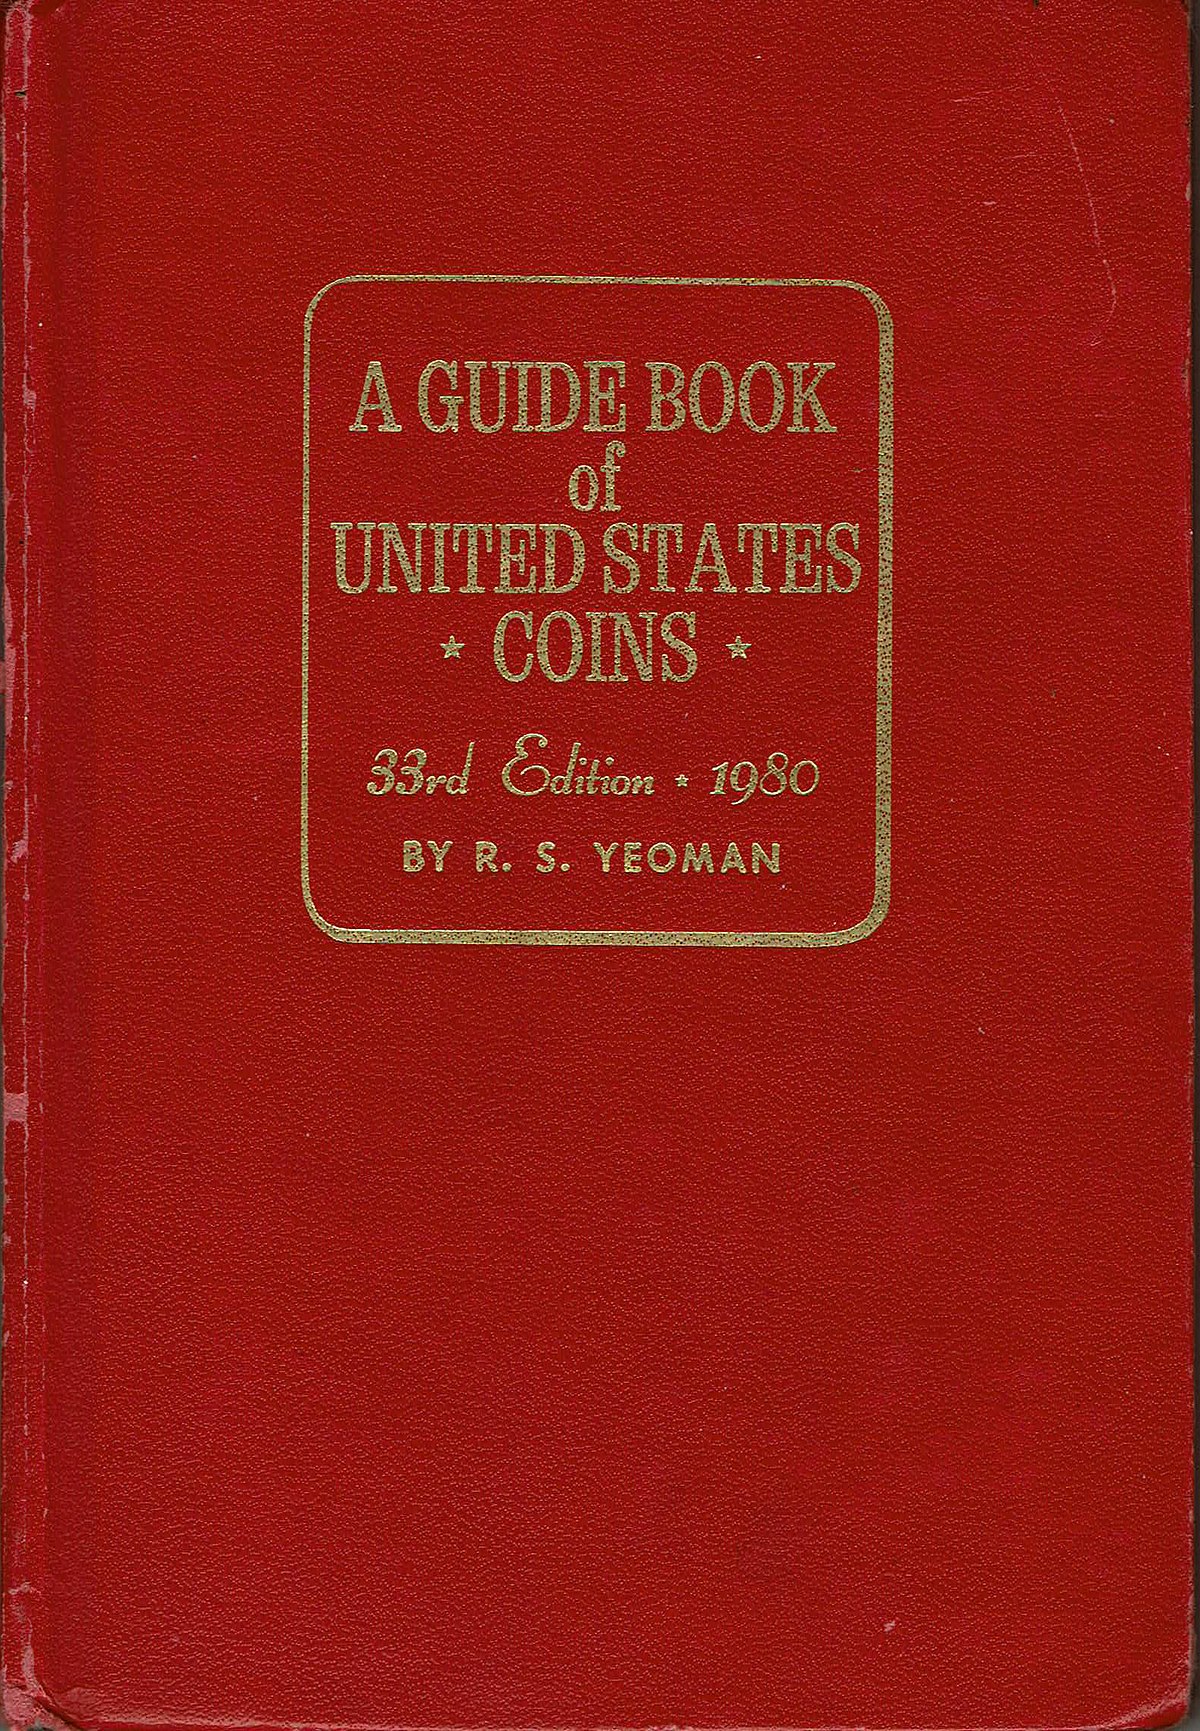 Handbook of United States Coins 2015 Yeoman S The Official Blue Book by R